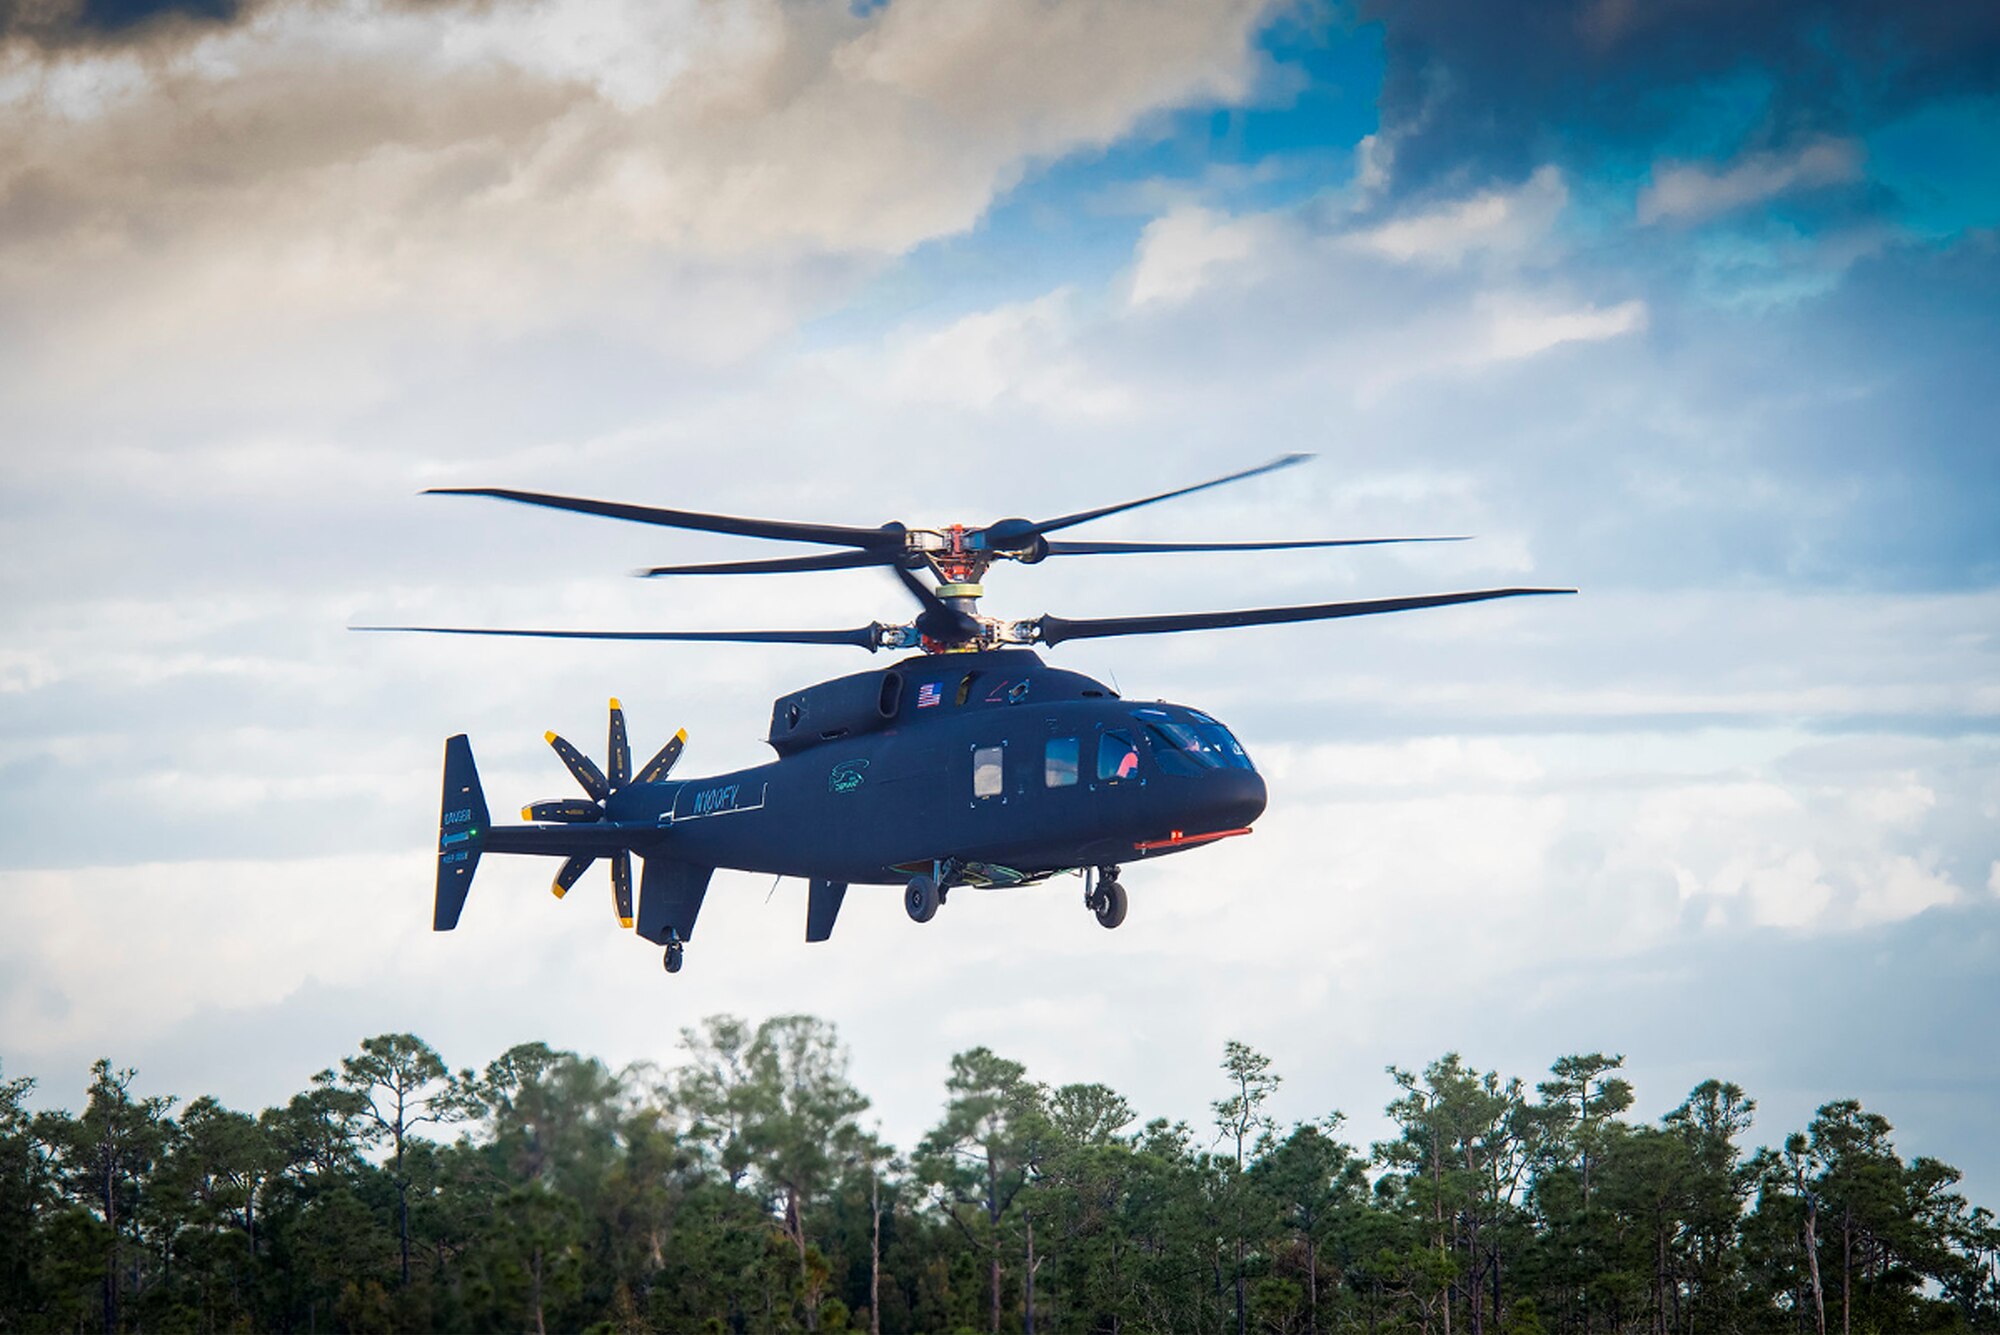 The Sikorsky-Boeing SB>1 DEFIANT™ is shown during its first flight in March. The military helicopter, being developed for the Army’s Joint Multi-Role Technology Demonstrator program, was tested earlier this year at the AEDC National Full-Scale Aerodynamics Complex at Moffett Field in Mountain View, California. (Courtesy photo)